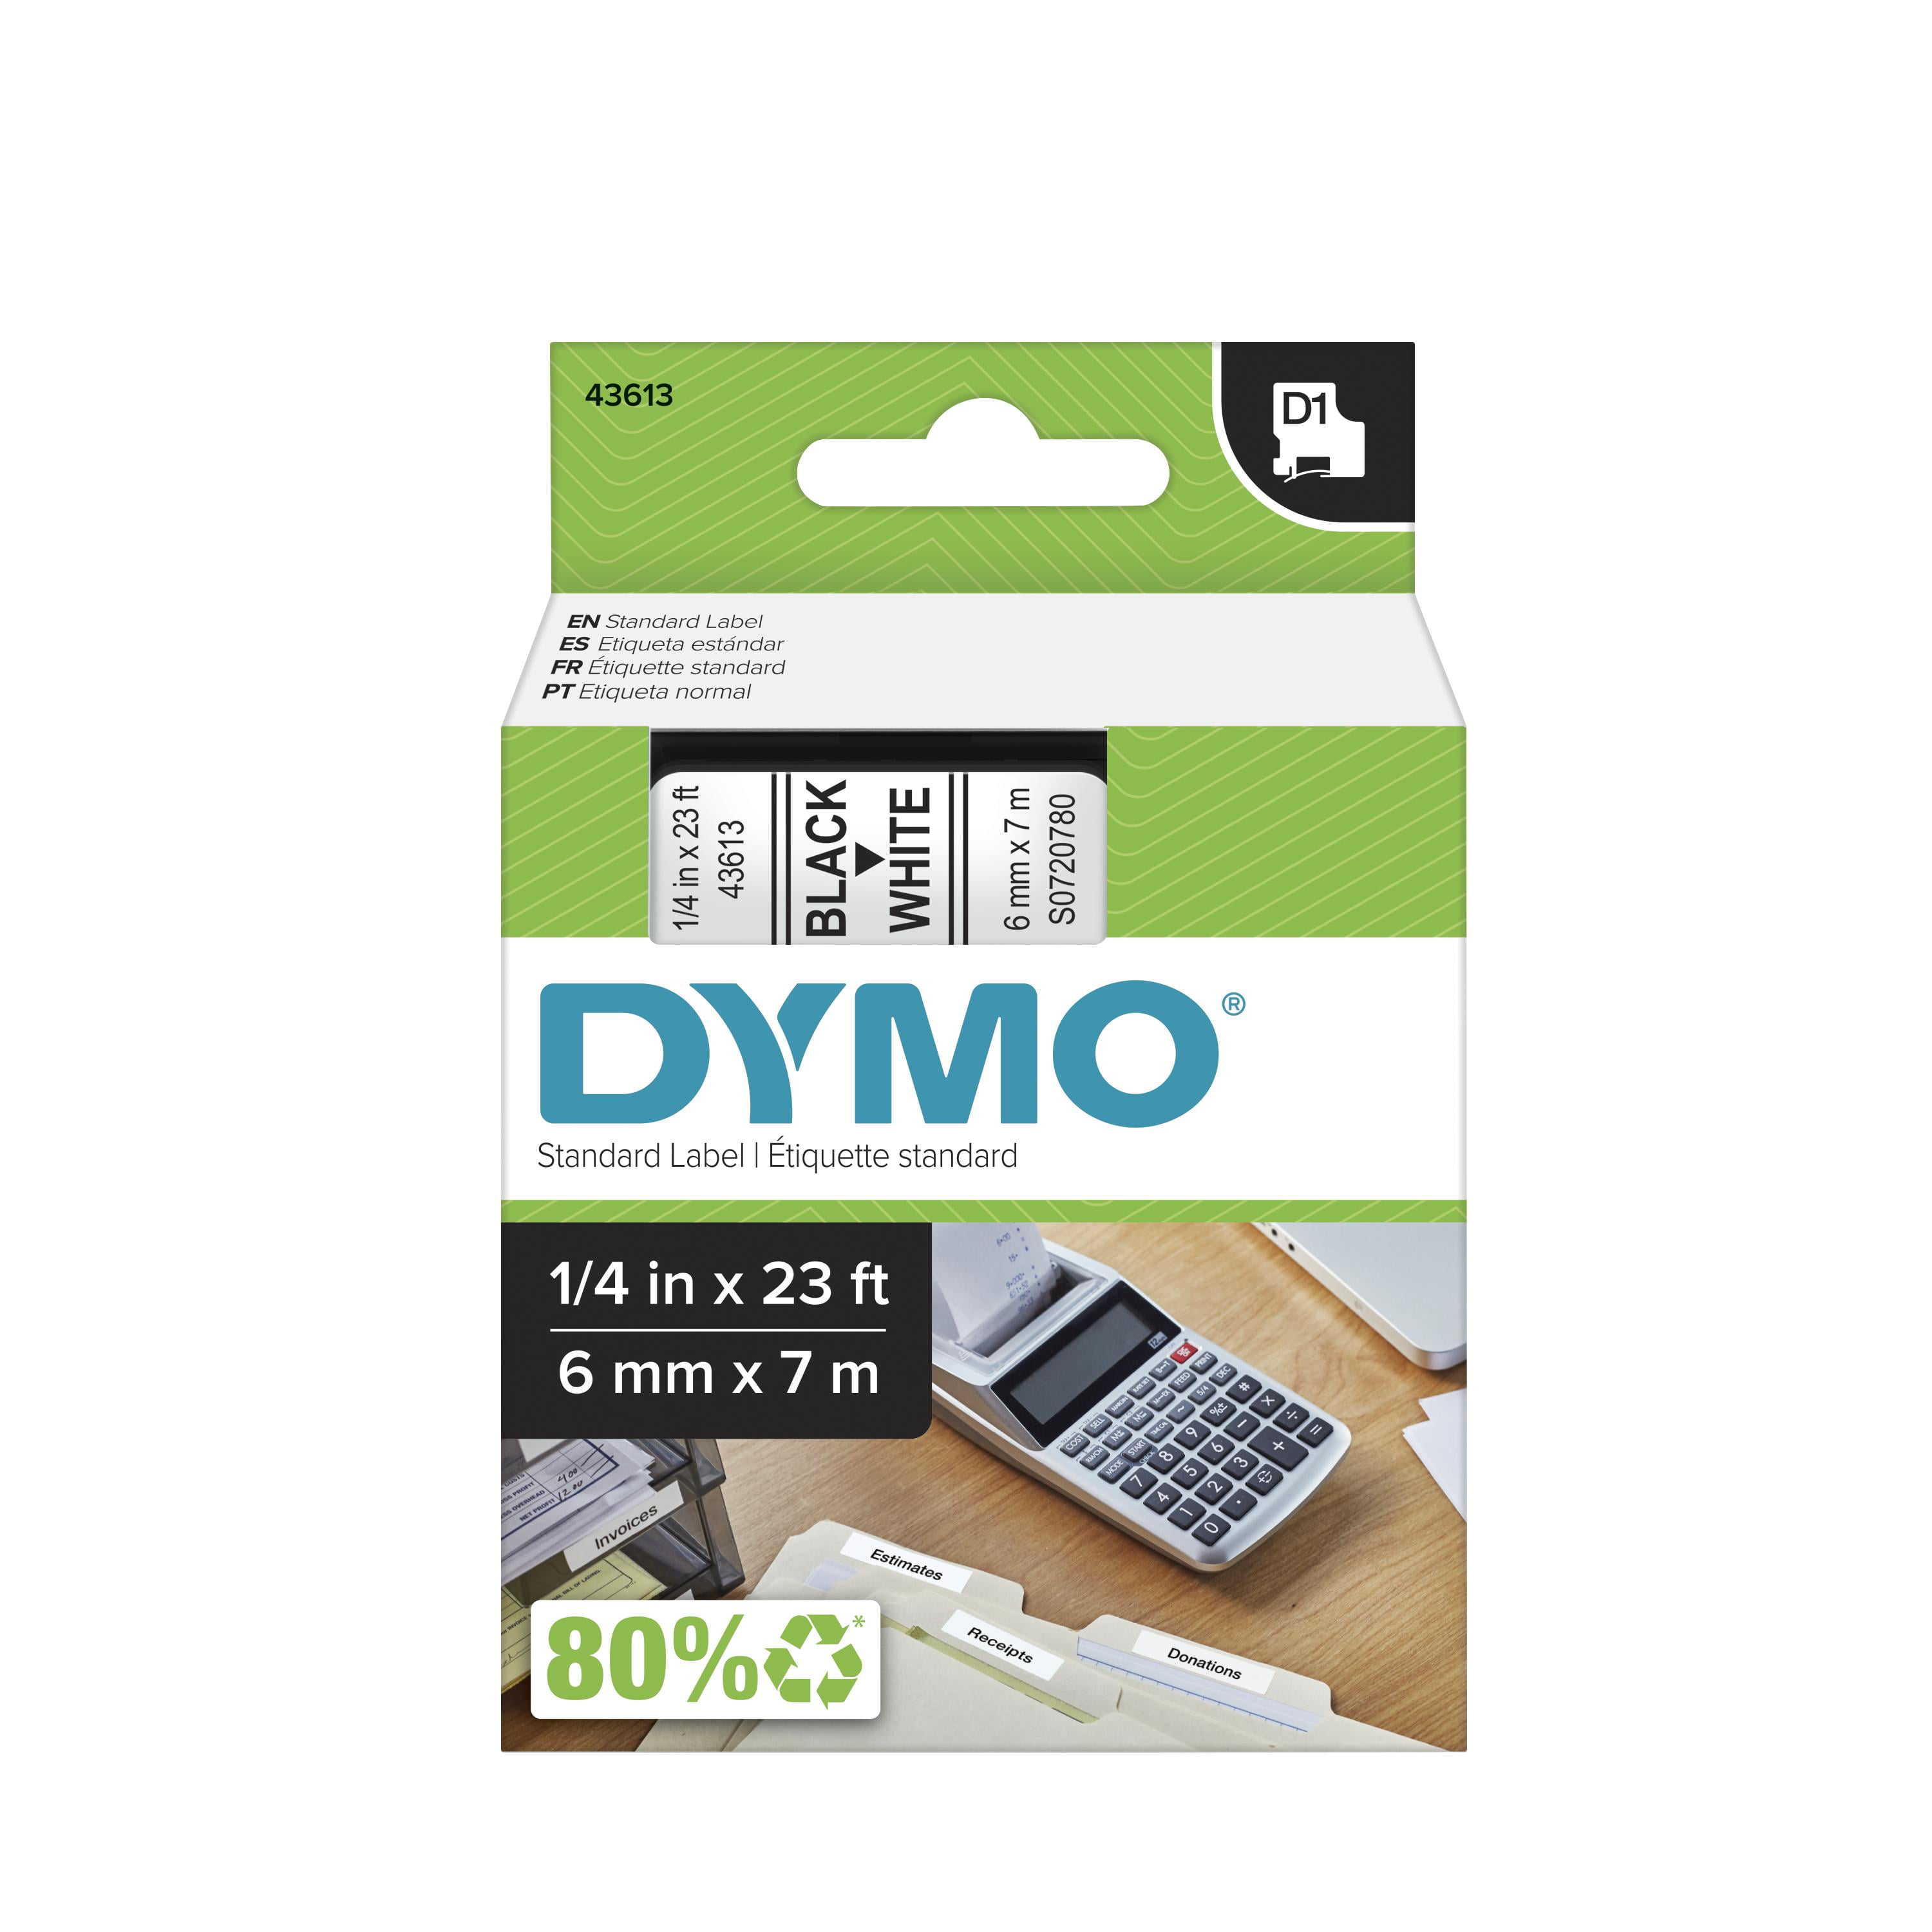 Details about   20PK 43613 Black on White Label Tape for DYMO D1 LabelManager 450D 100 6mm 1/4" 